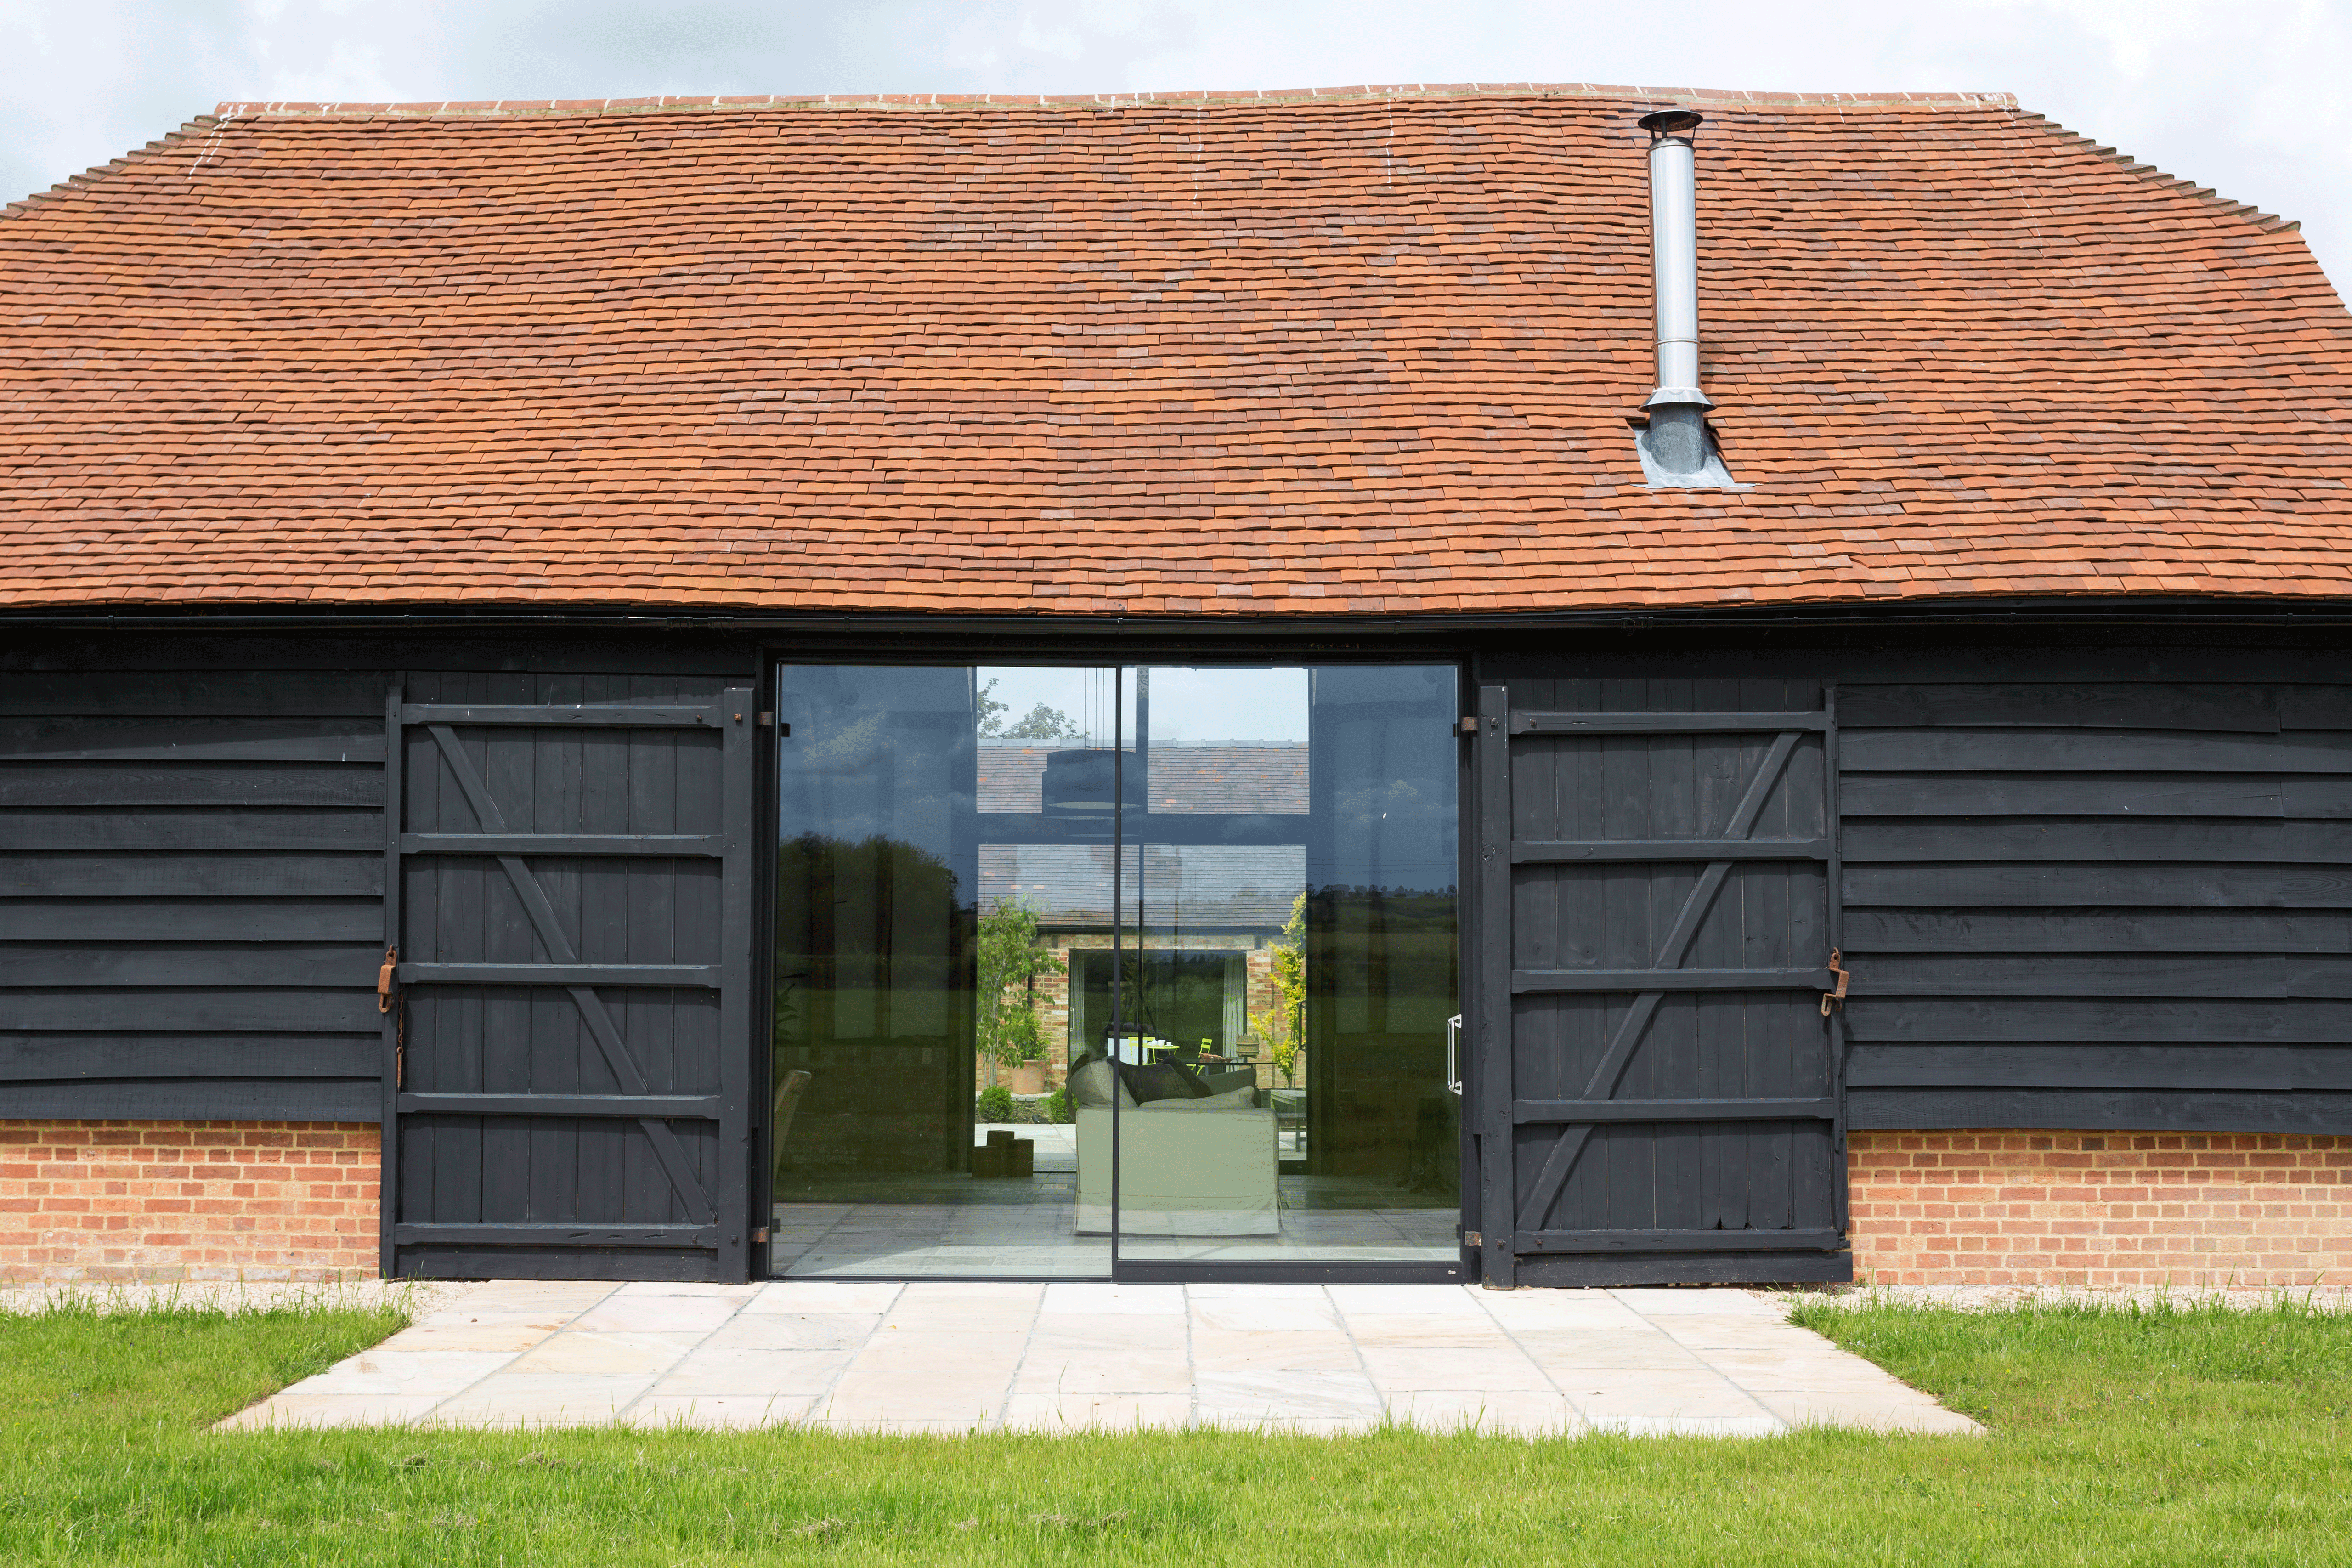 Barn conversion with glazed openings